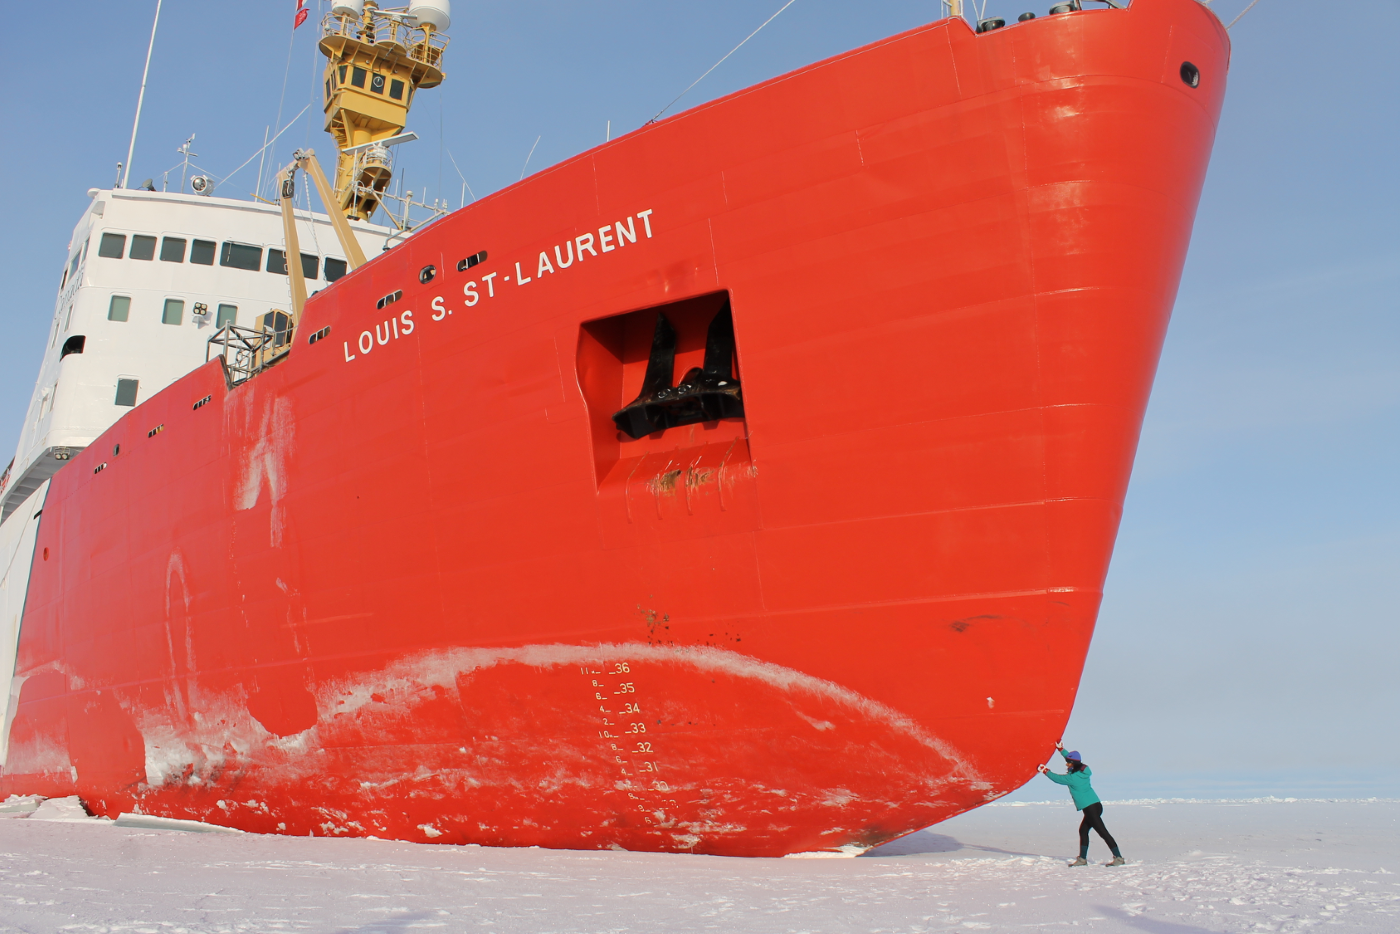 Large red  ice breaker ship fills the frame with small figure in the bottom right seeming to push the ship